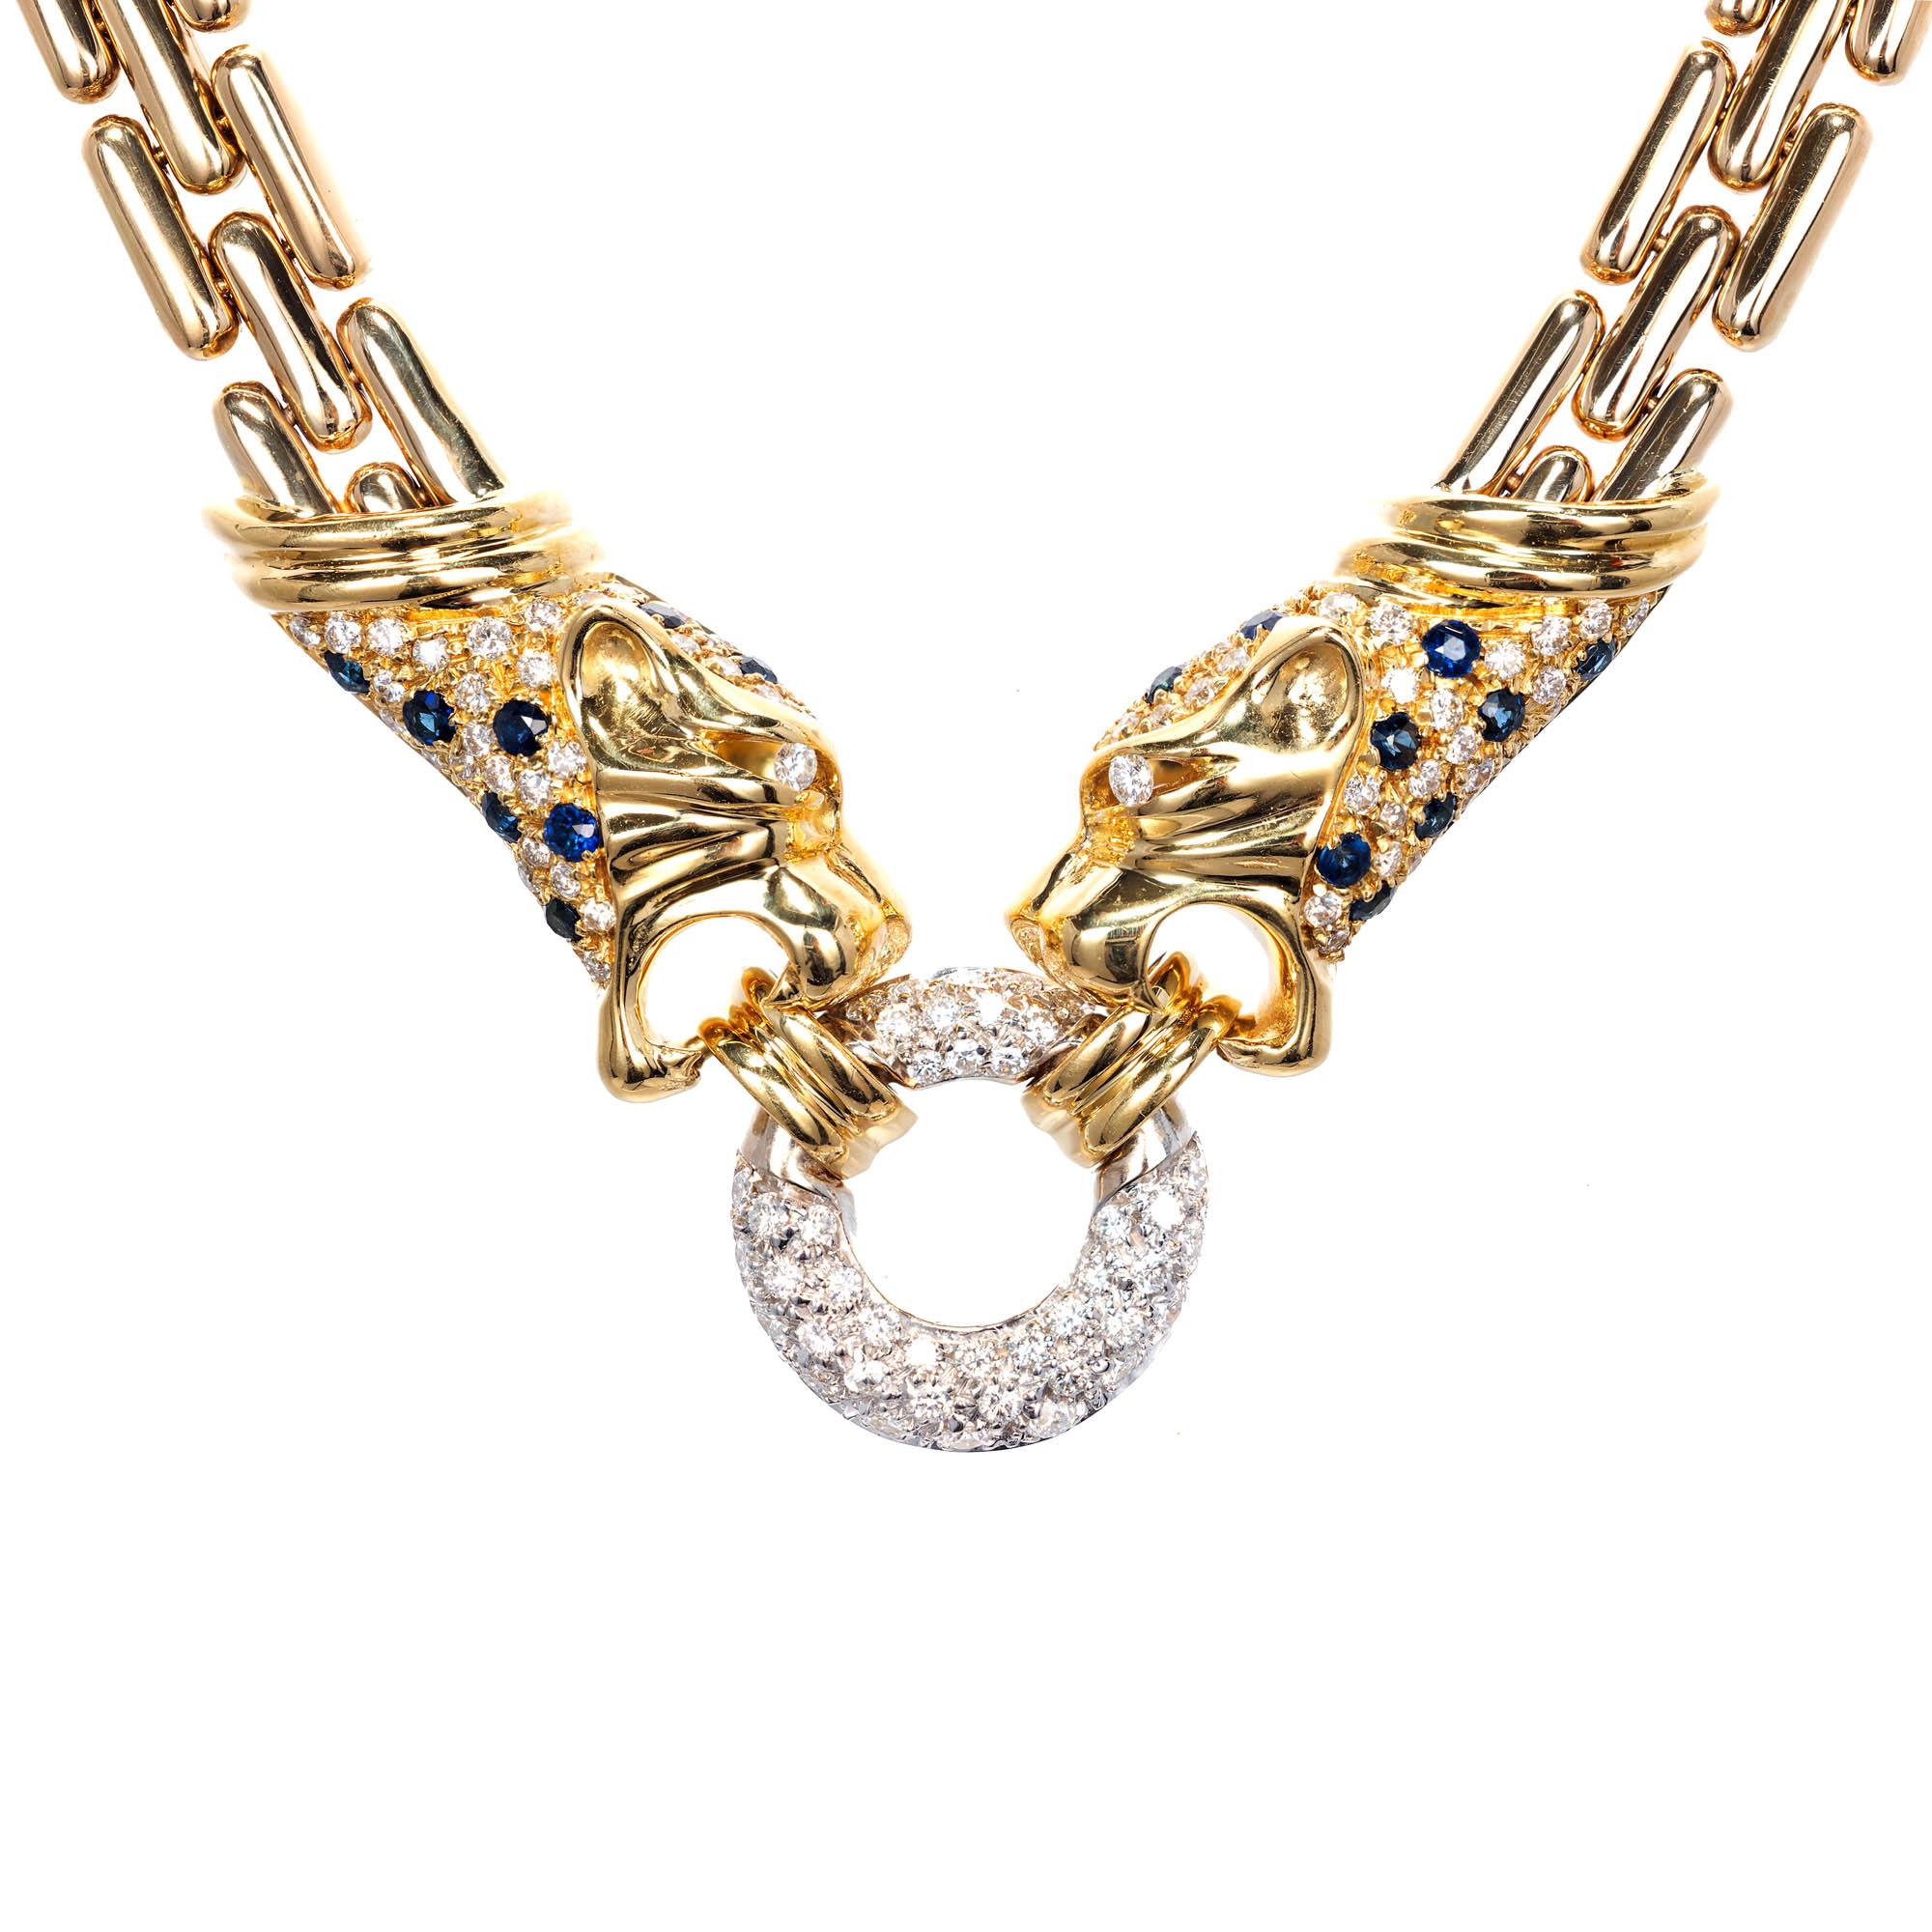 Three row panther necklace in 18k yellow gold with two diamond sapphire panther hands and a diamond circle in the middle. Circa 1990

74 round brilliant cut G-H VS diamonds Approximate .95 carats 
17 Blue Sapphires .50 carats
42 round brilliant cut